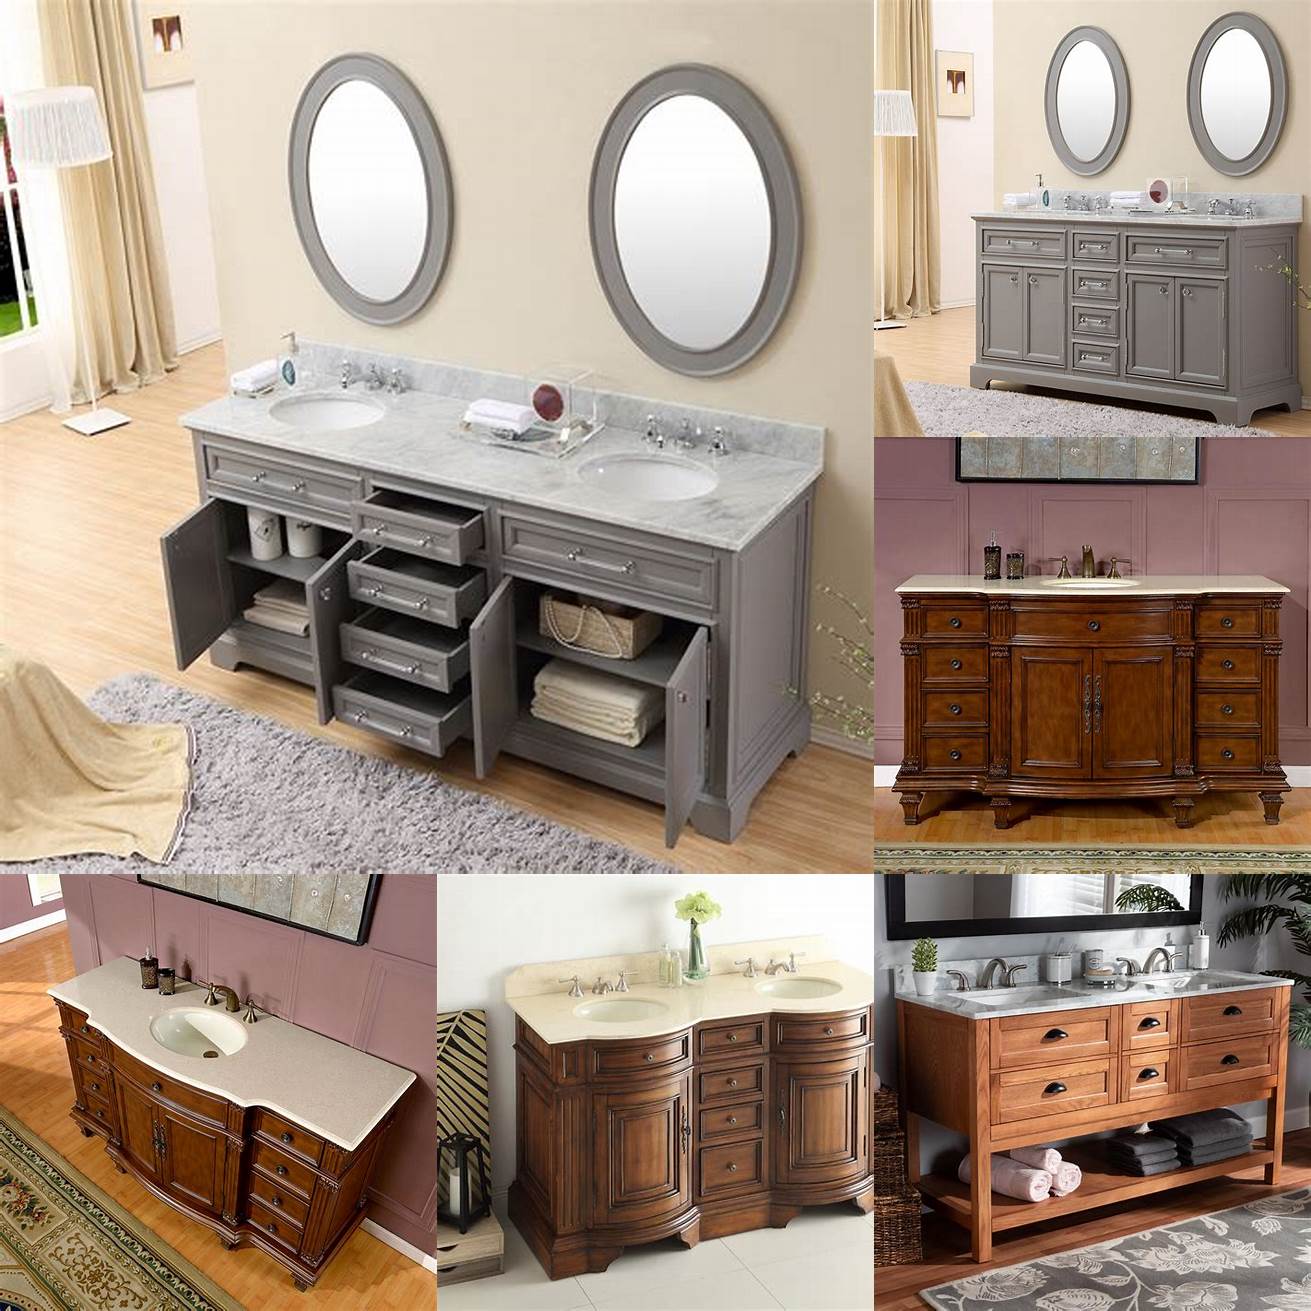 A traditional 60-inch bathroom vanity with intricate details